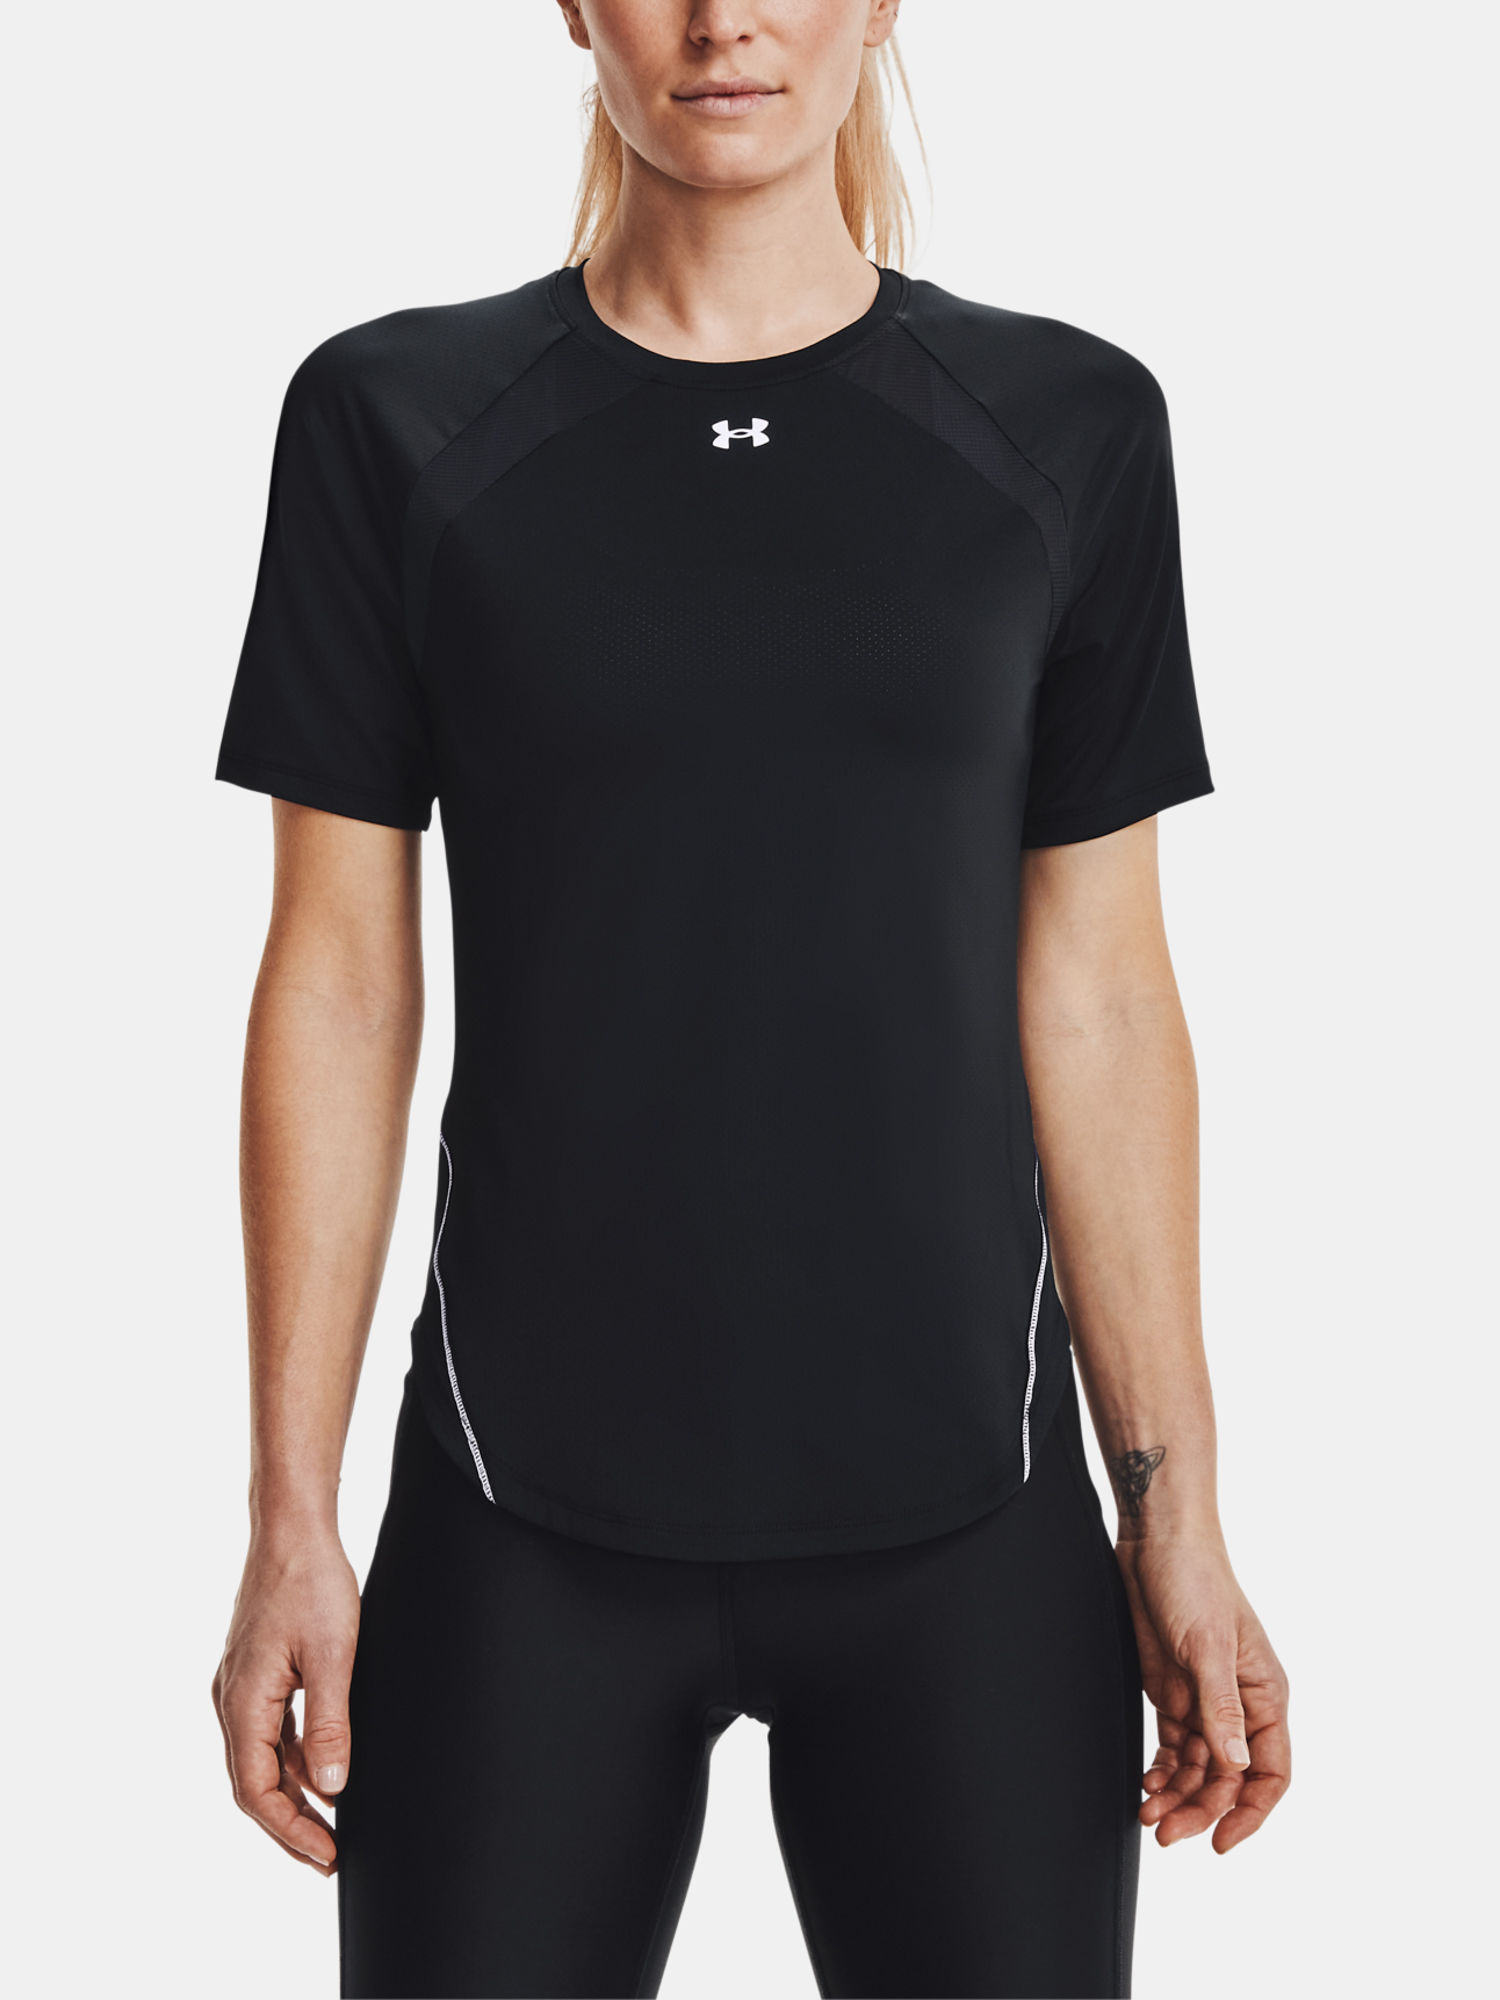 Tričko Under Armour Coolswitch SS-BLK (1)